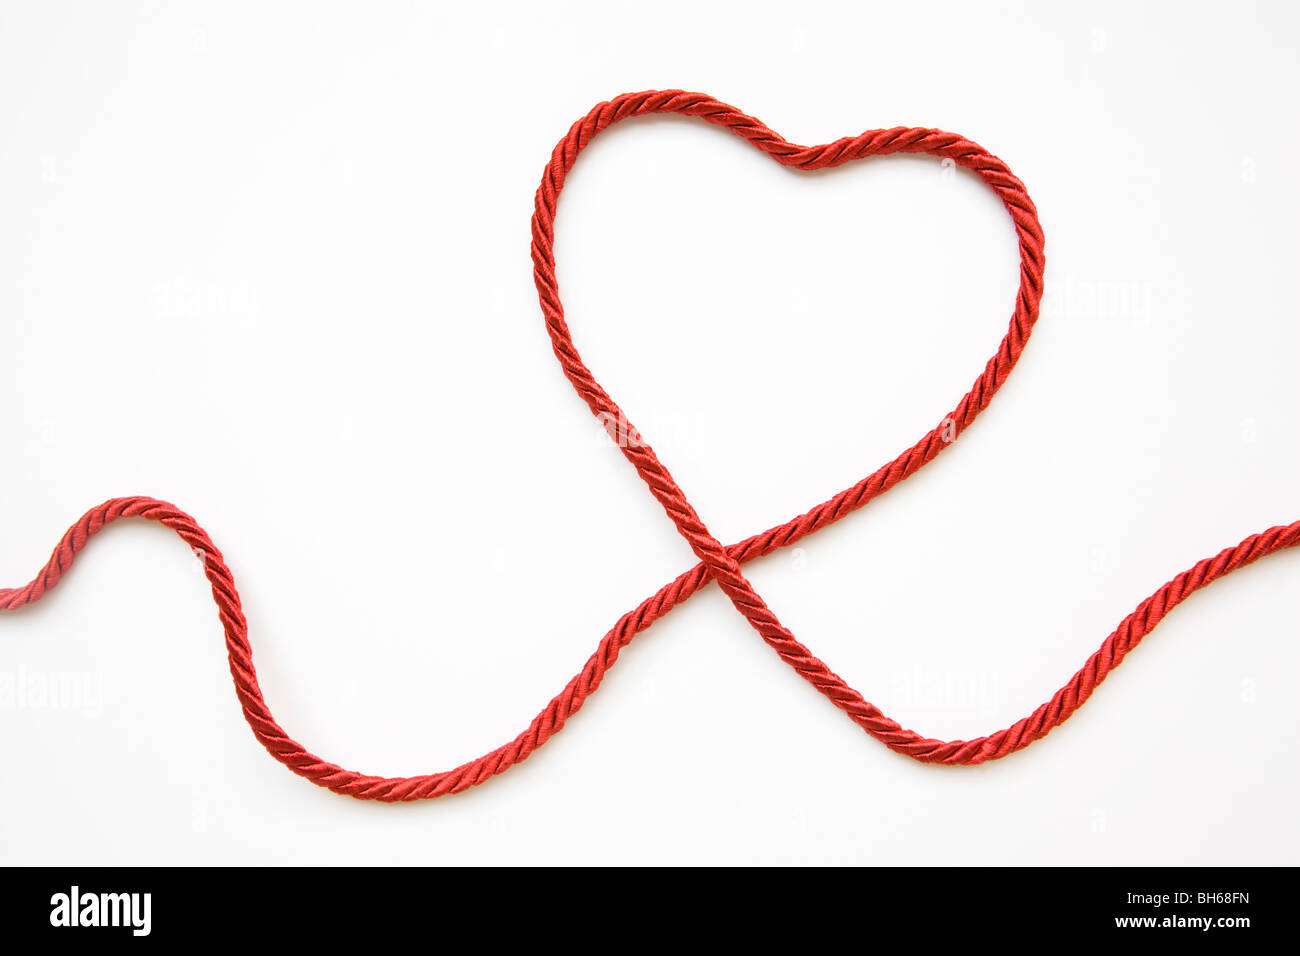 Heart Shape Made From Red Cord Stock Photo